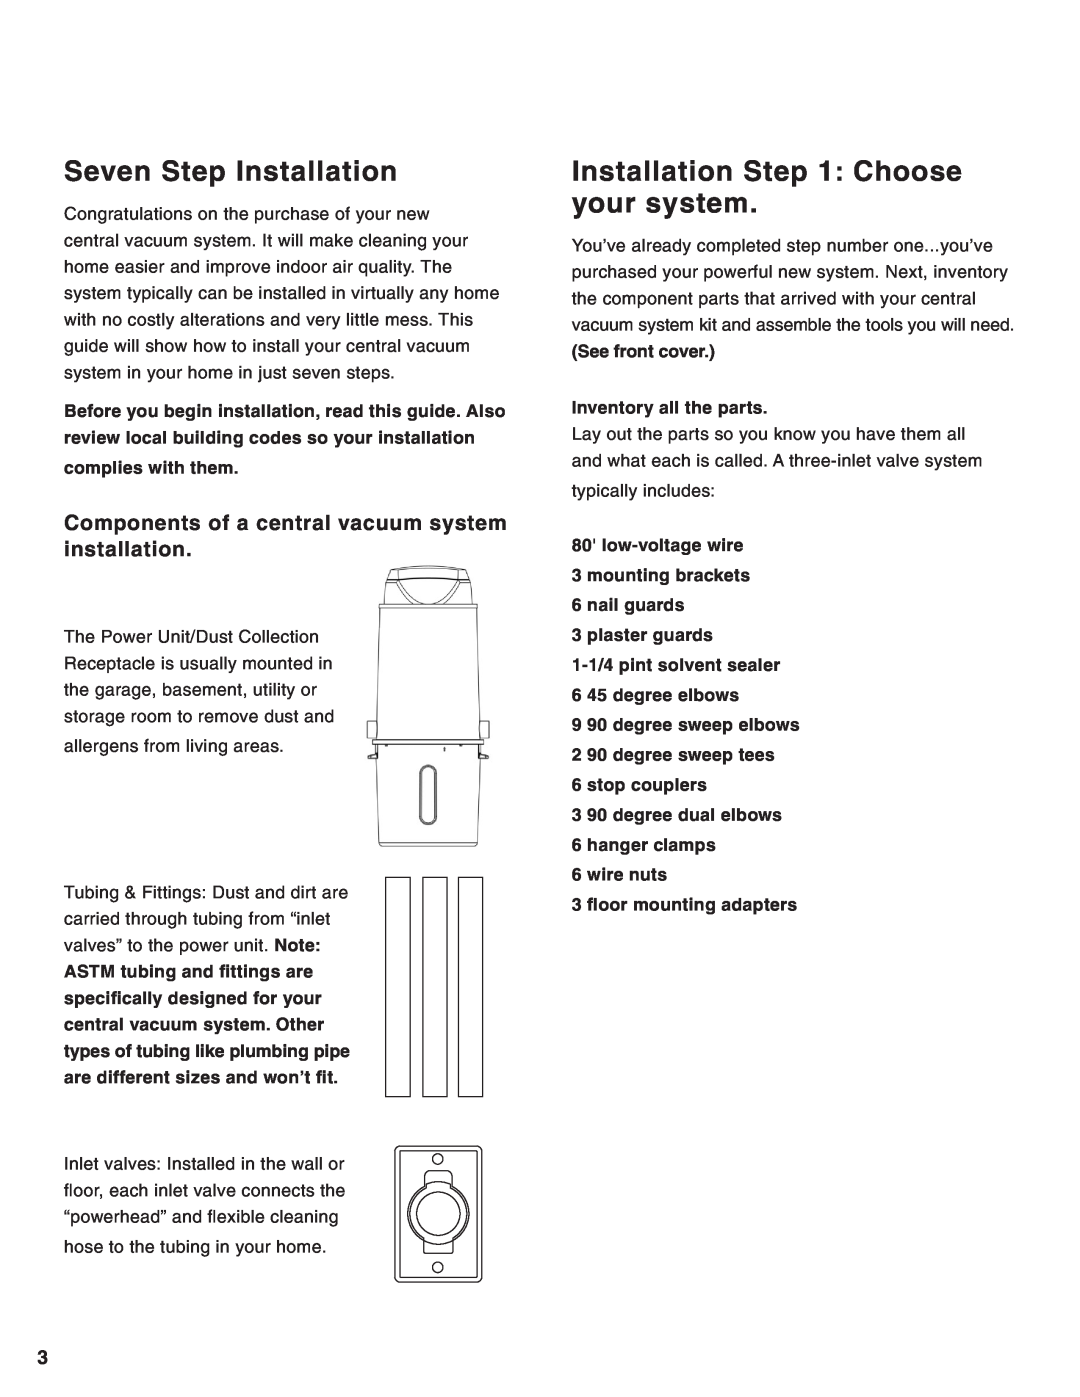 Eureka Central Vacuum Cleaner manual Seven Step Installation, Installation Choose your system, complies with them 